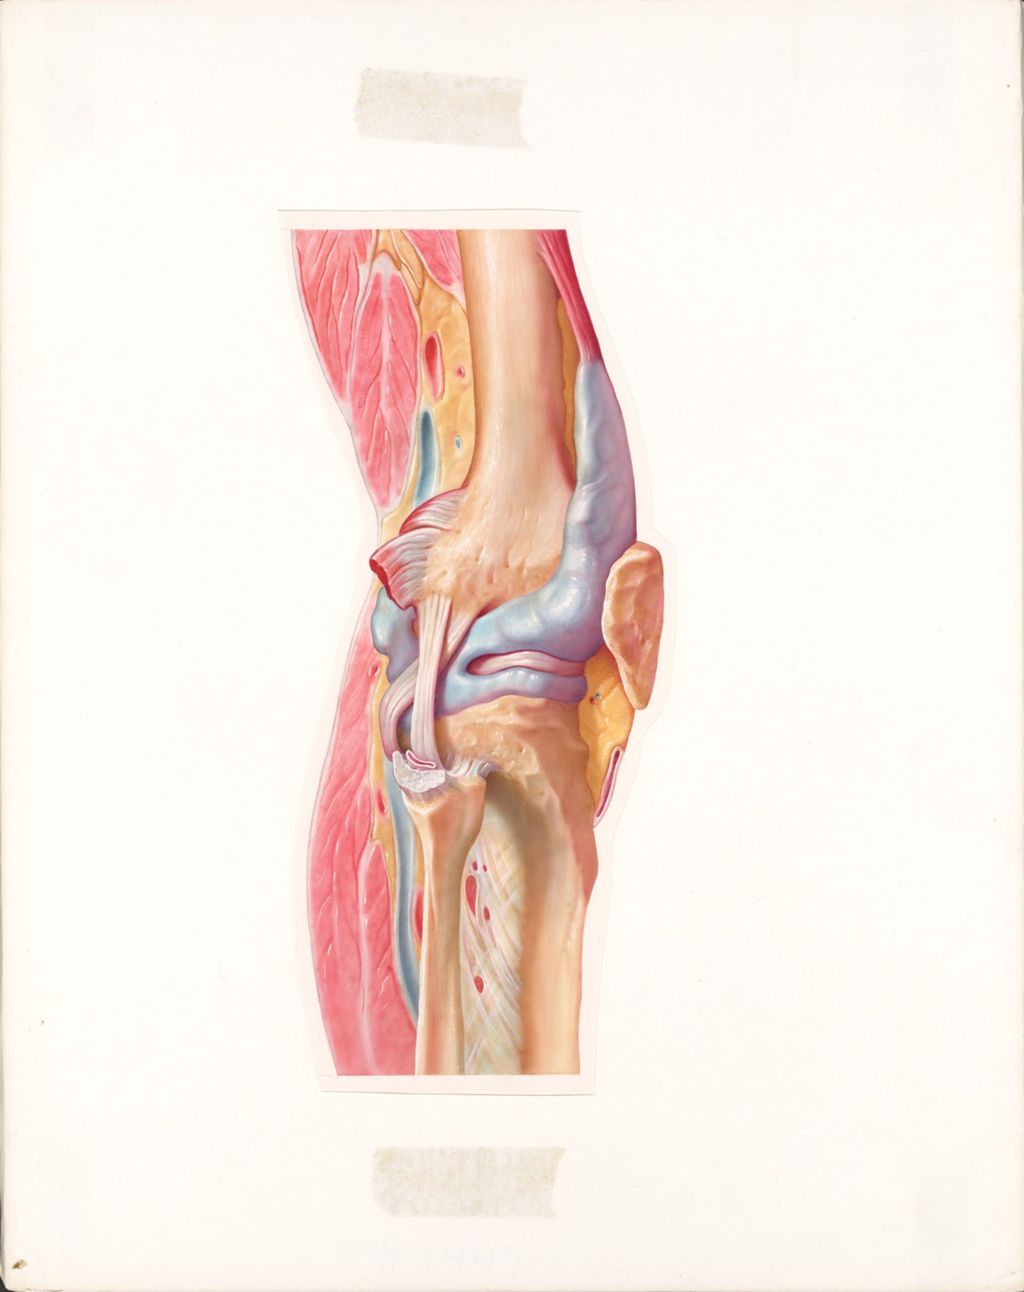 Miniature of The knee, the synovial capsule and bursae of the knee, anterolateral aspect